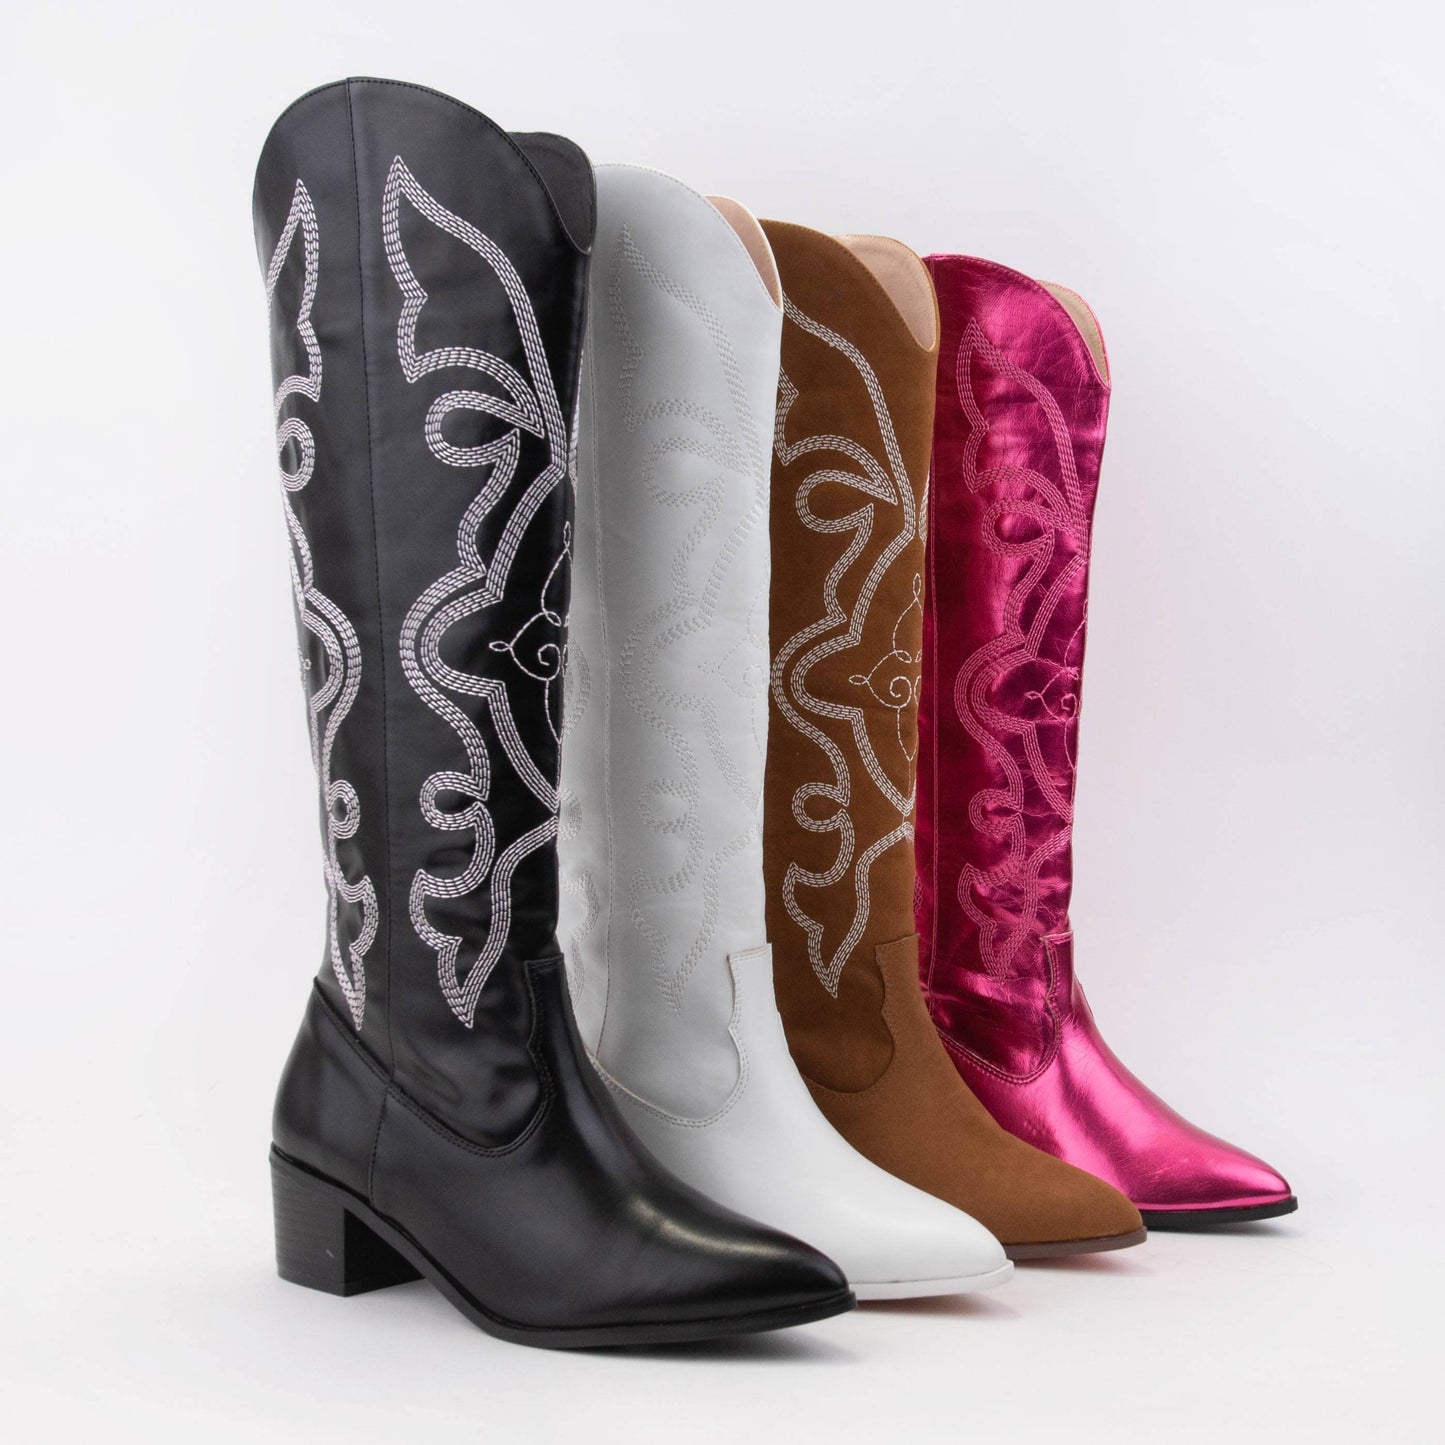 MALENA EMBROIDERED WESTERN TALL BOOTS BLACK